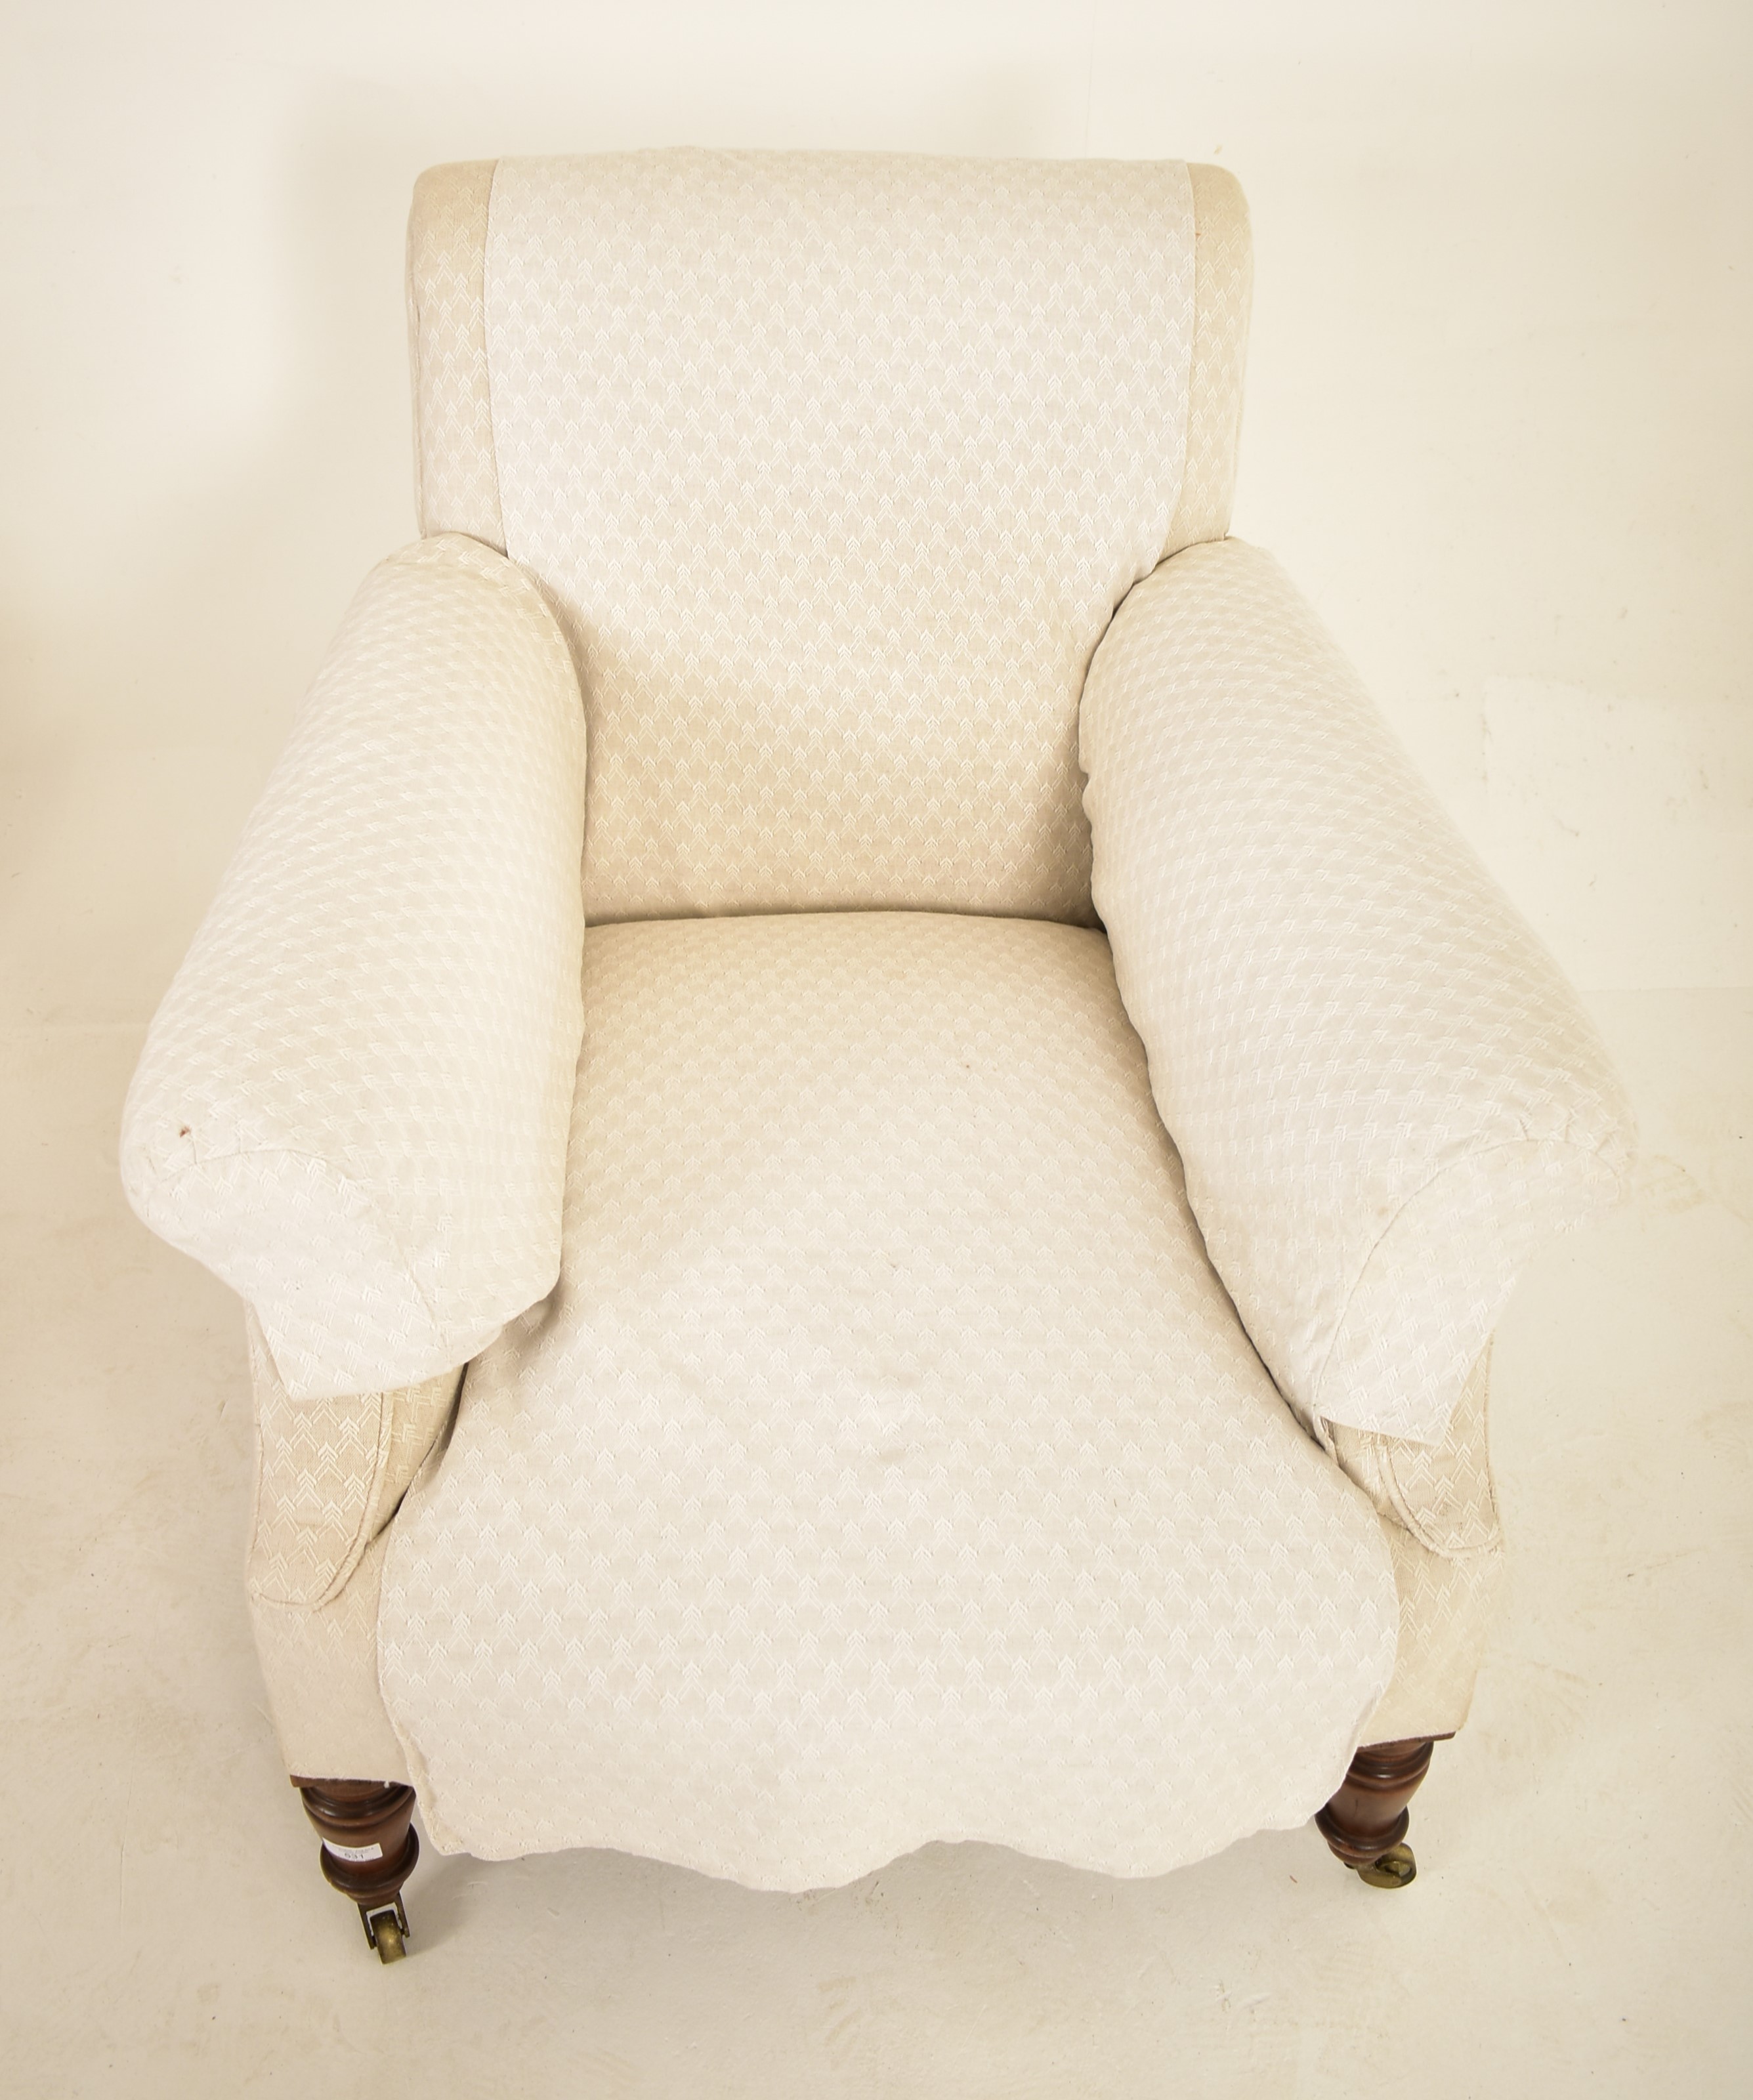 HOWARD & SONS STYLE VICTORIAN UPHOLSTERED ARMCHAIR - Image 3 of 7